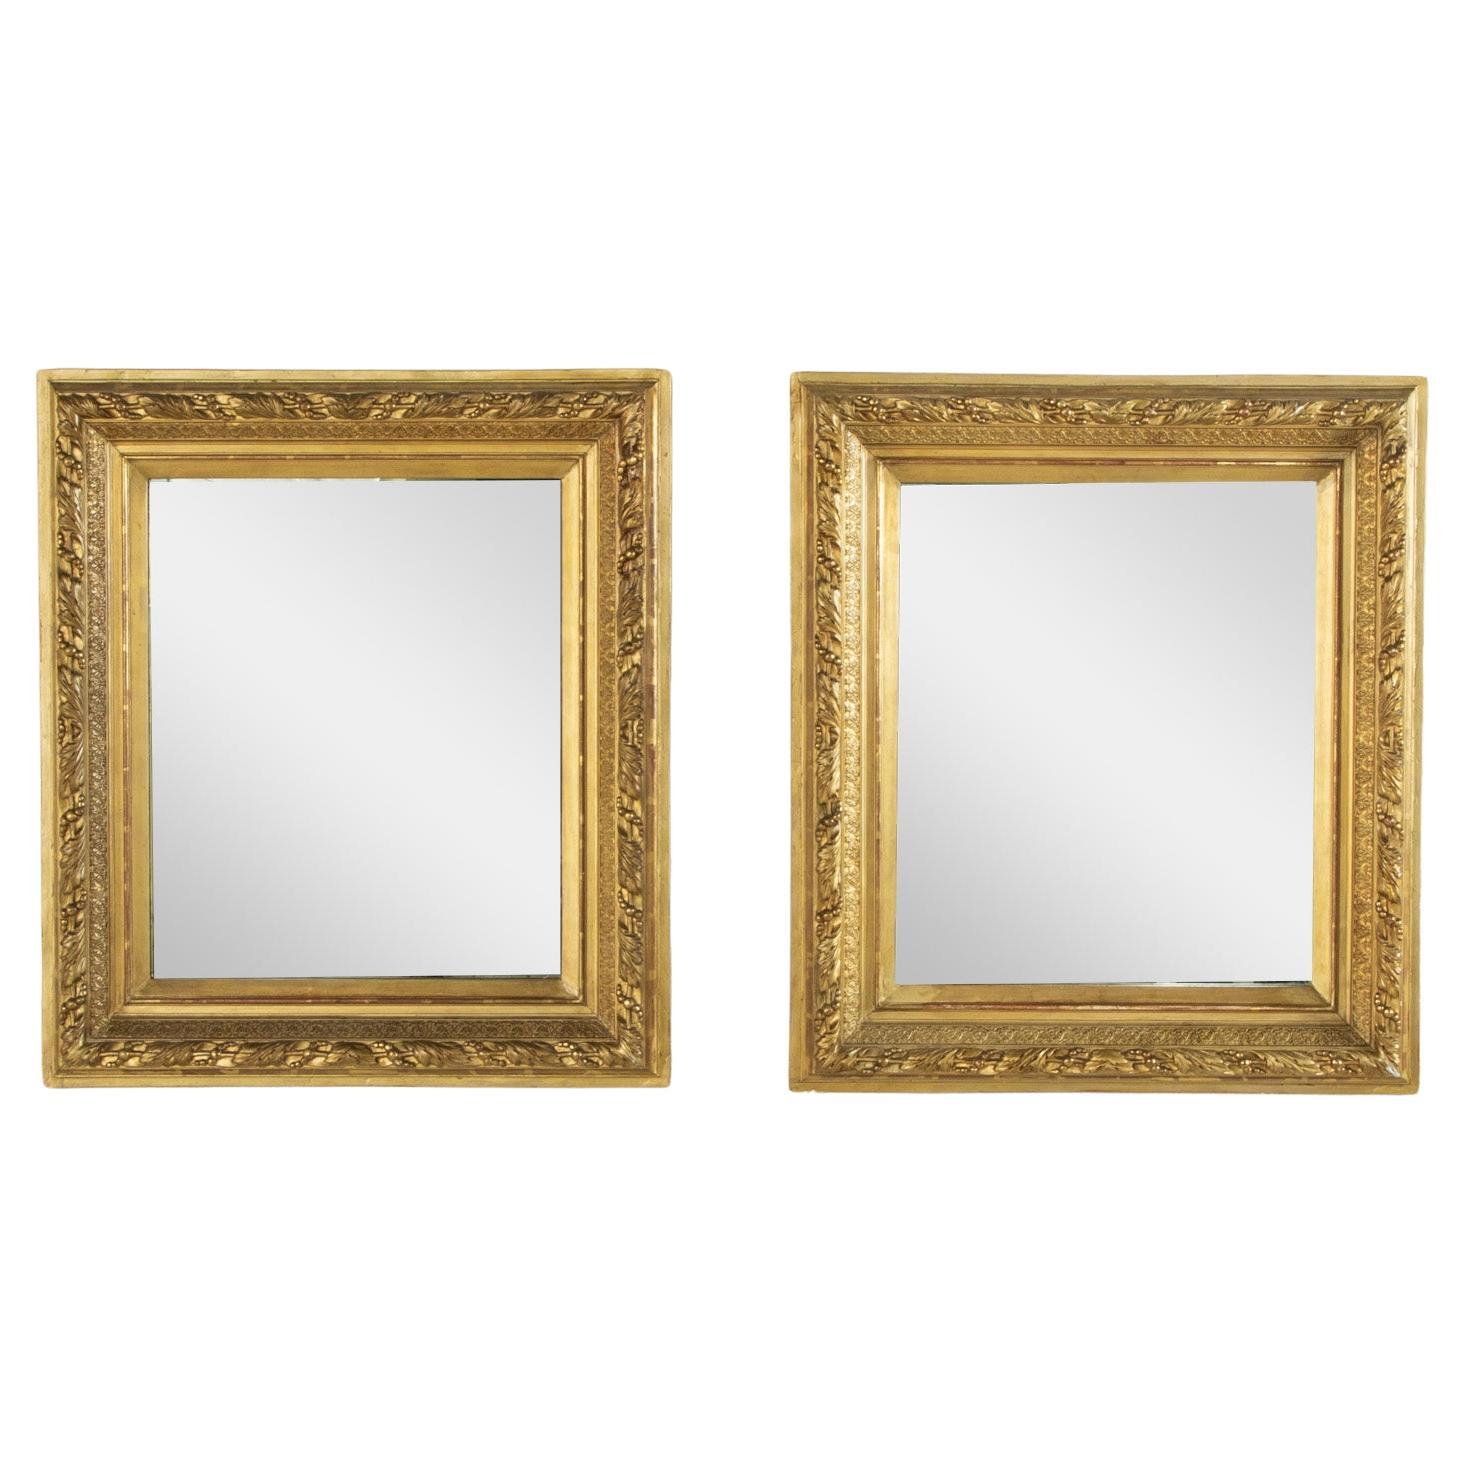 Pair of Late 19th Century French Restauration Style Gilt Wood Wall Mirrors